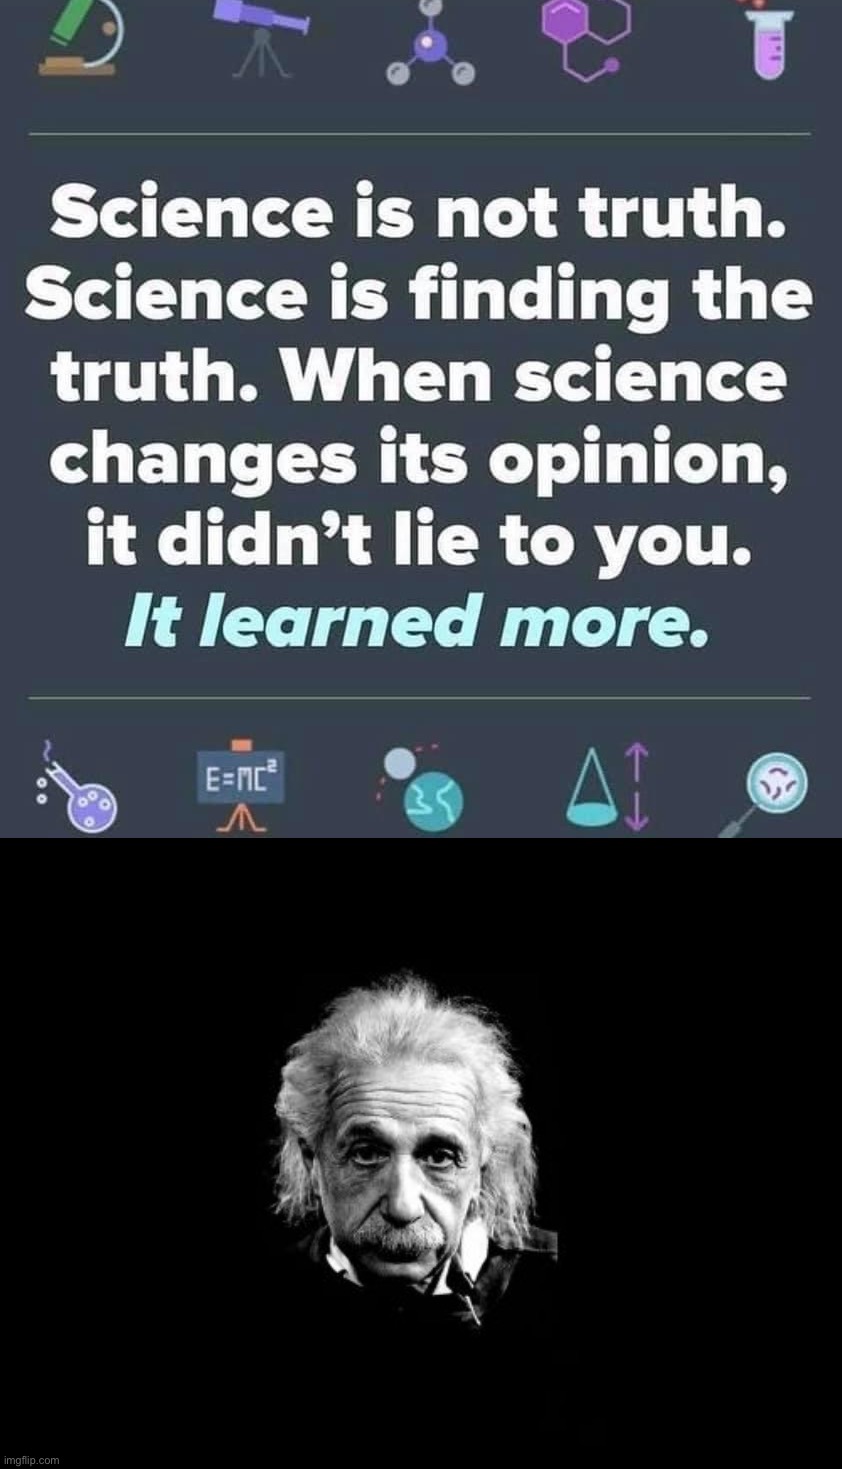 well, why didn’t science know it in the first place? Answer that, Einstein | image tagged in science is not truth,memes,albert einstein 1 | made w/ Imgflip meme maker